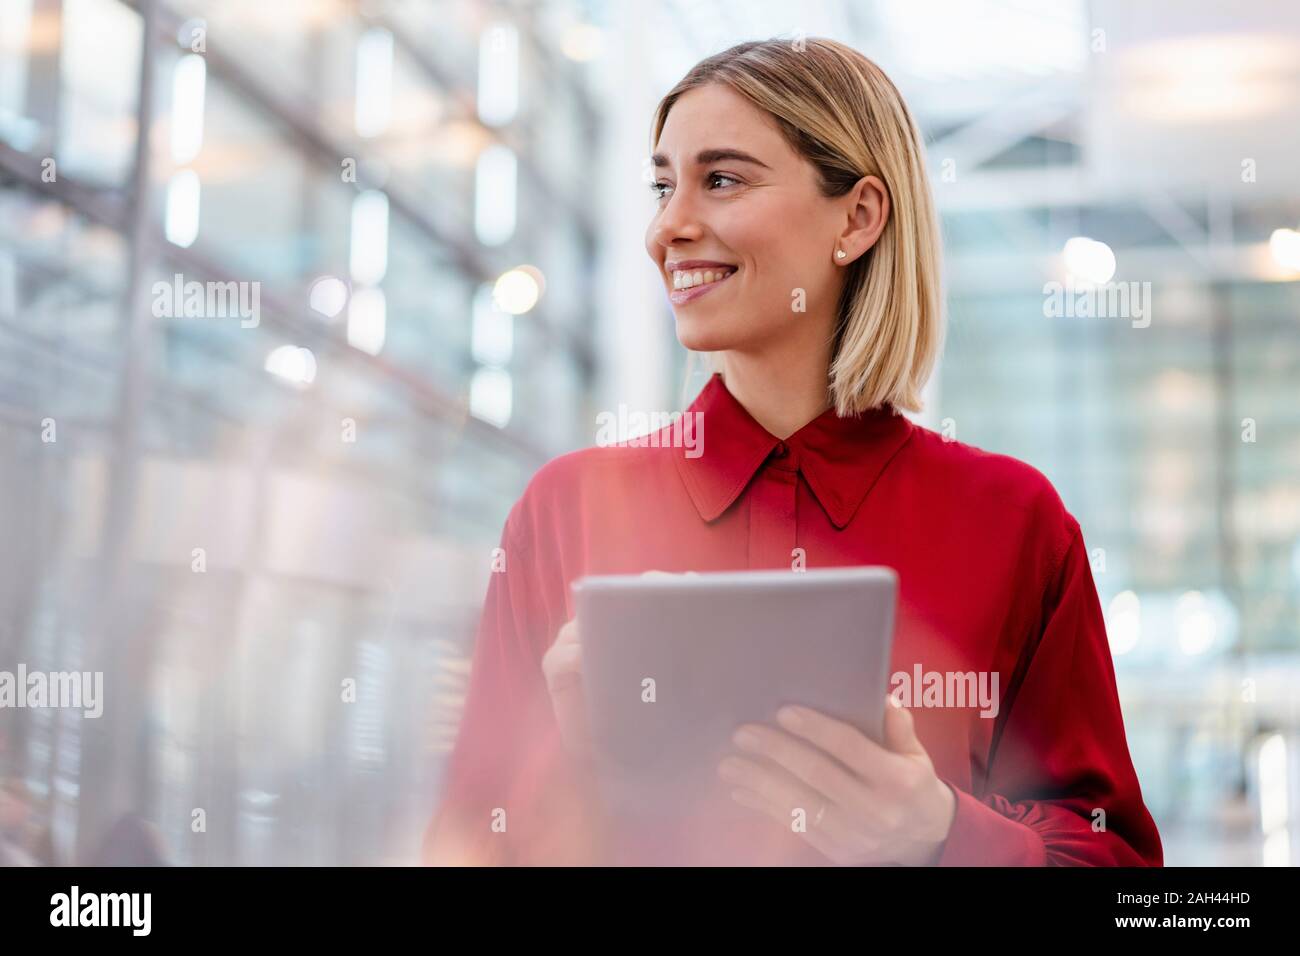 Smiling young businesswoman wearing red shirt using tablet Stock Photo